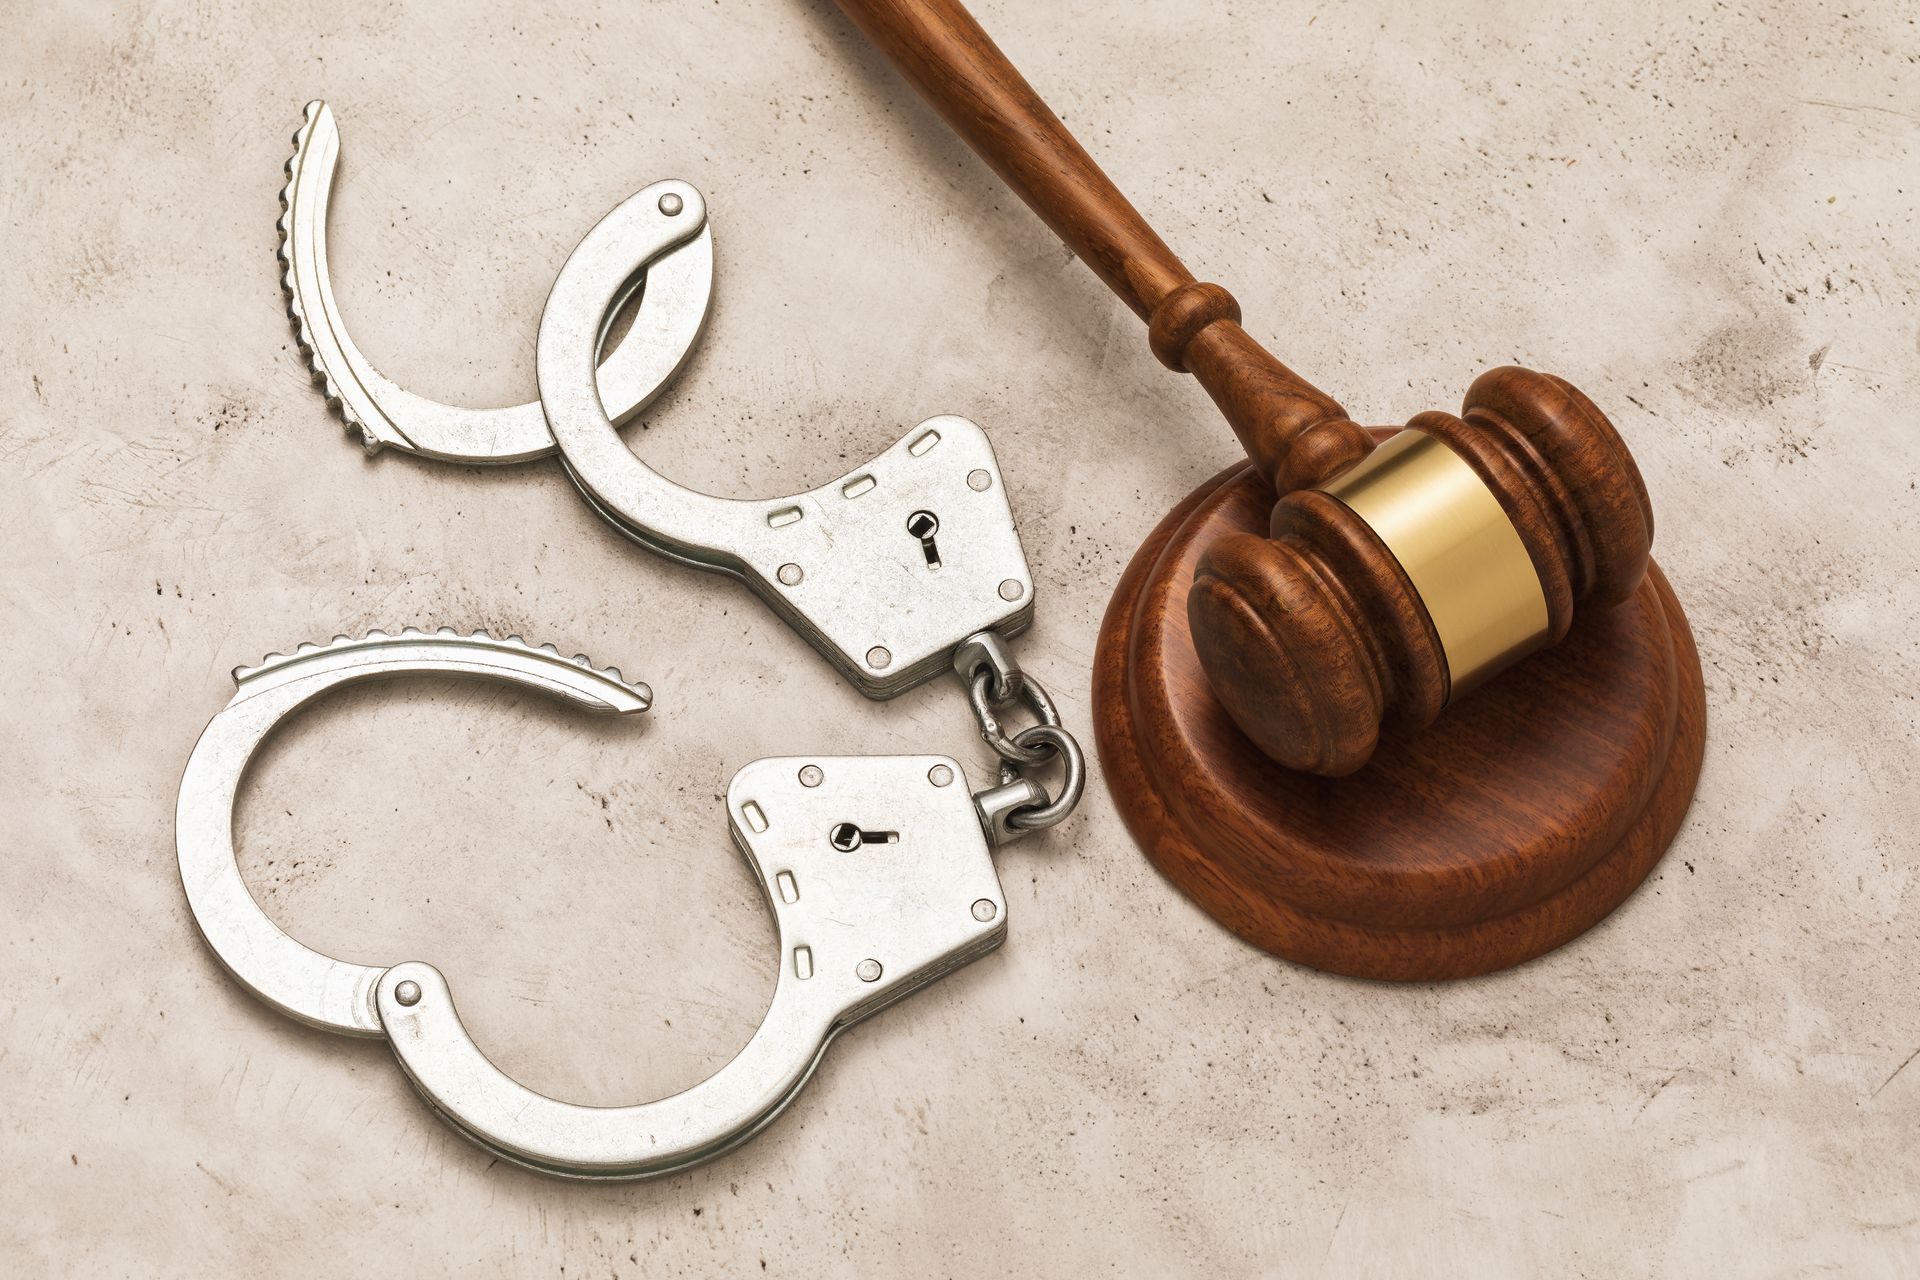 a pair of handcuffs and a judge 's gavel on a table .